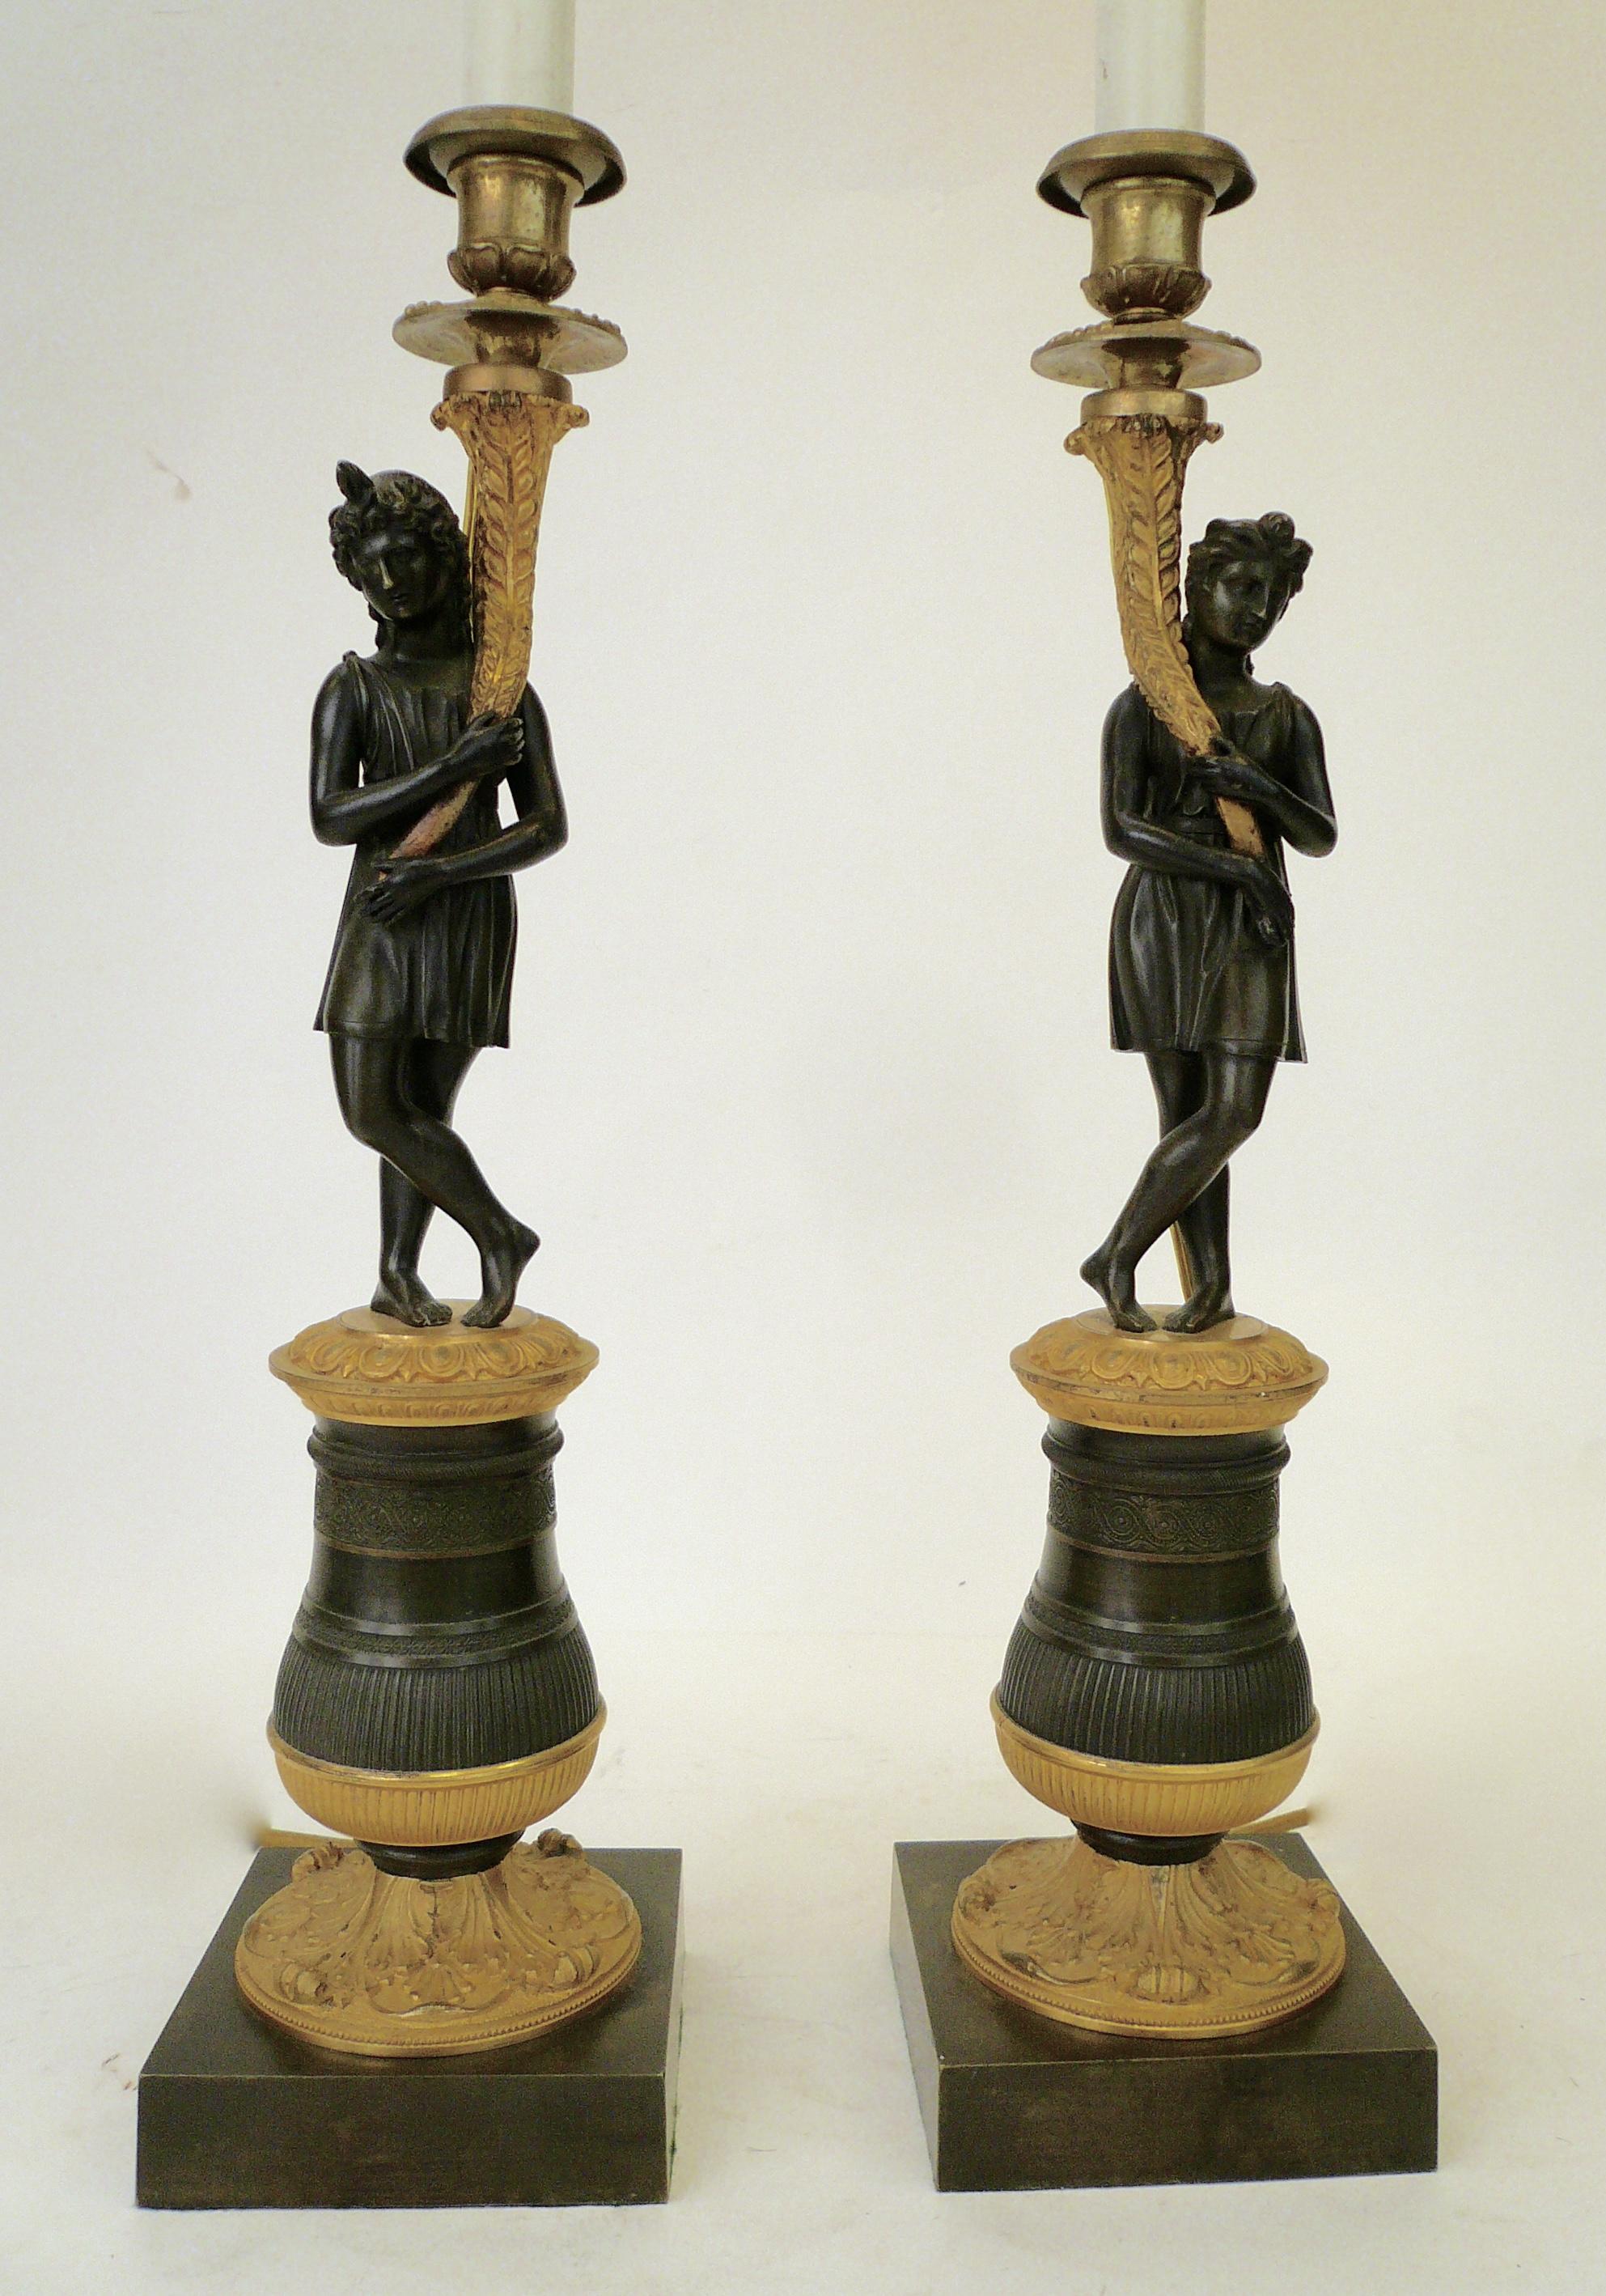 This handsome pair of lamp bases feature classical figures holding cornucopia. They stand on plinth bases that feature acanthus leaf and egg and dart motifs.